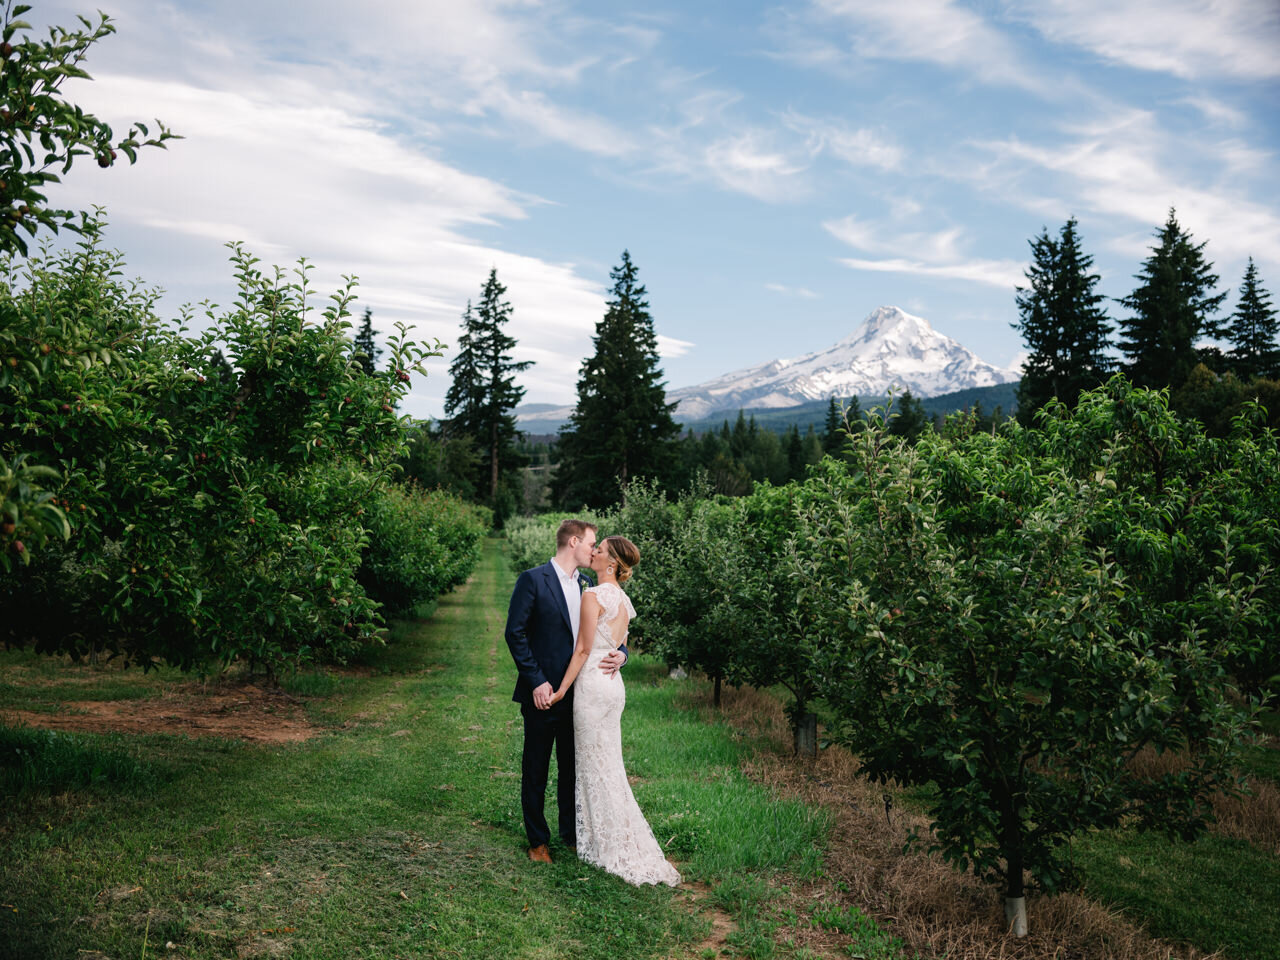  Bride and groom kissing in orchards with tall fir trees and mt hood behind them 